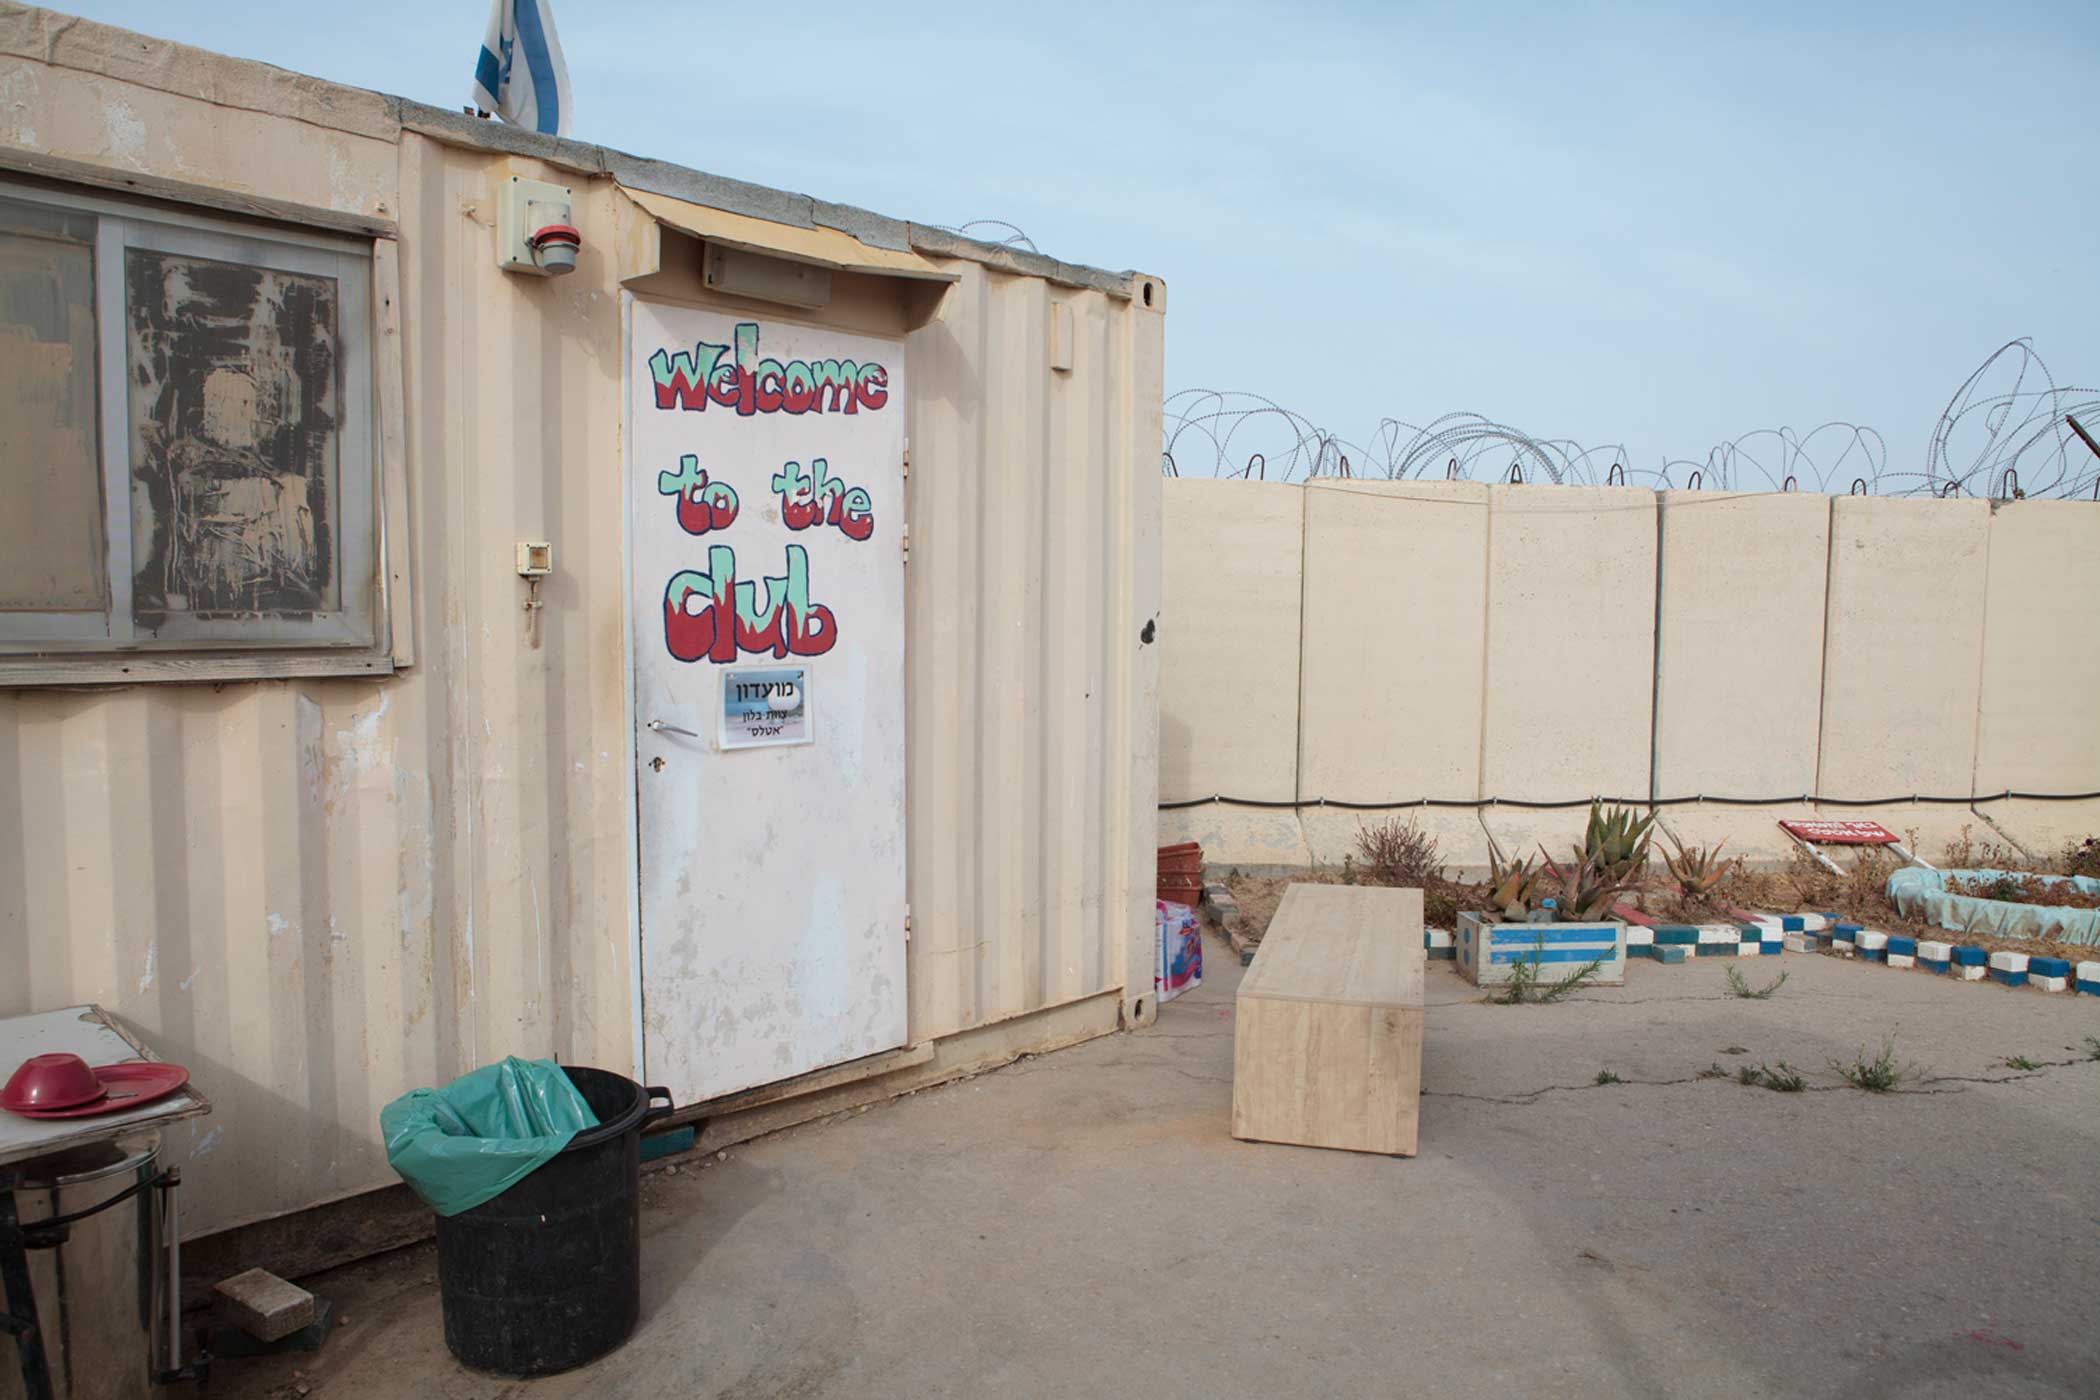 A small trailer used as a clubhouse by soldiers in the Sky Rider unit, on an Israeli military base next to the Erez Crossing on, the border with Gaza.